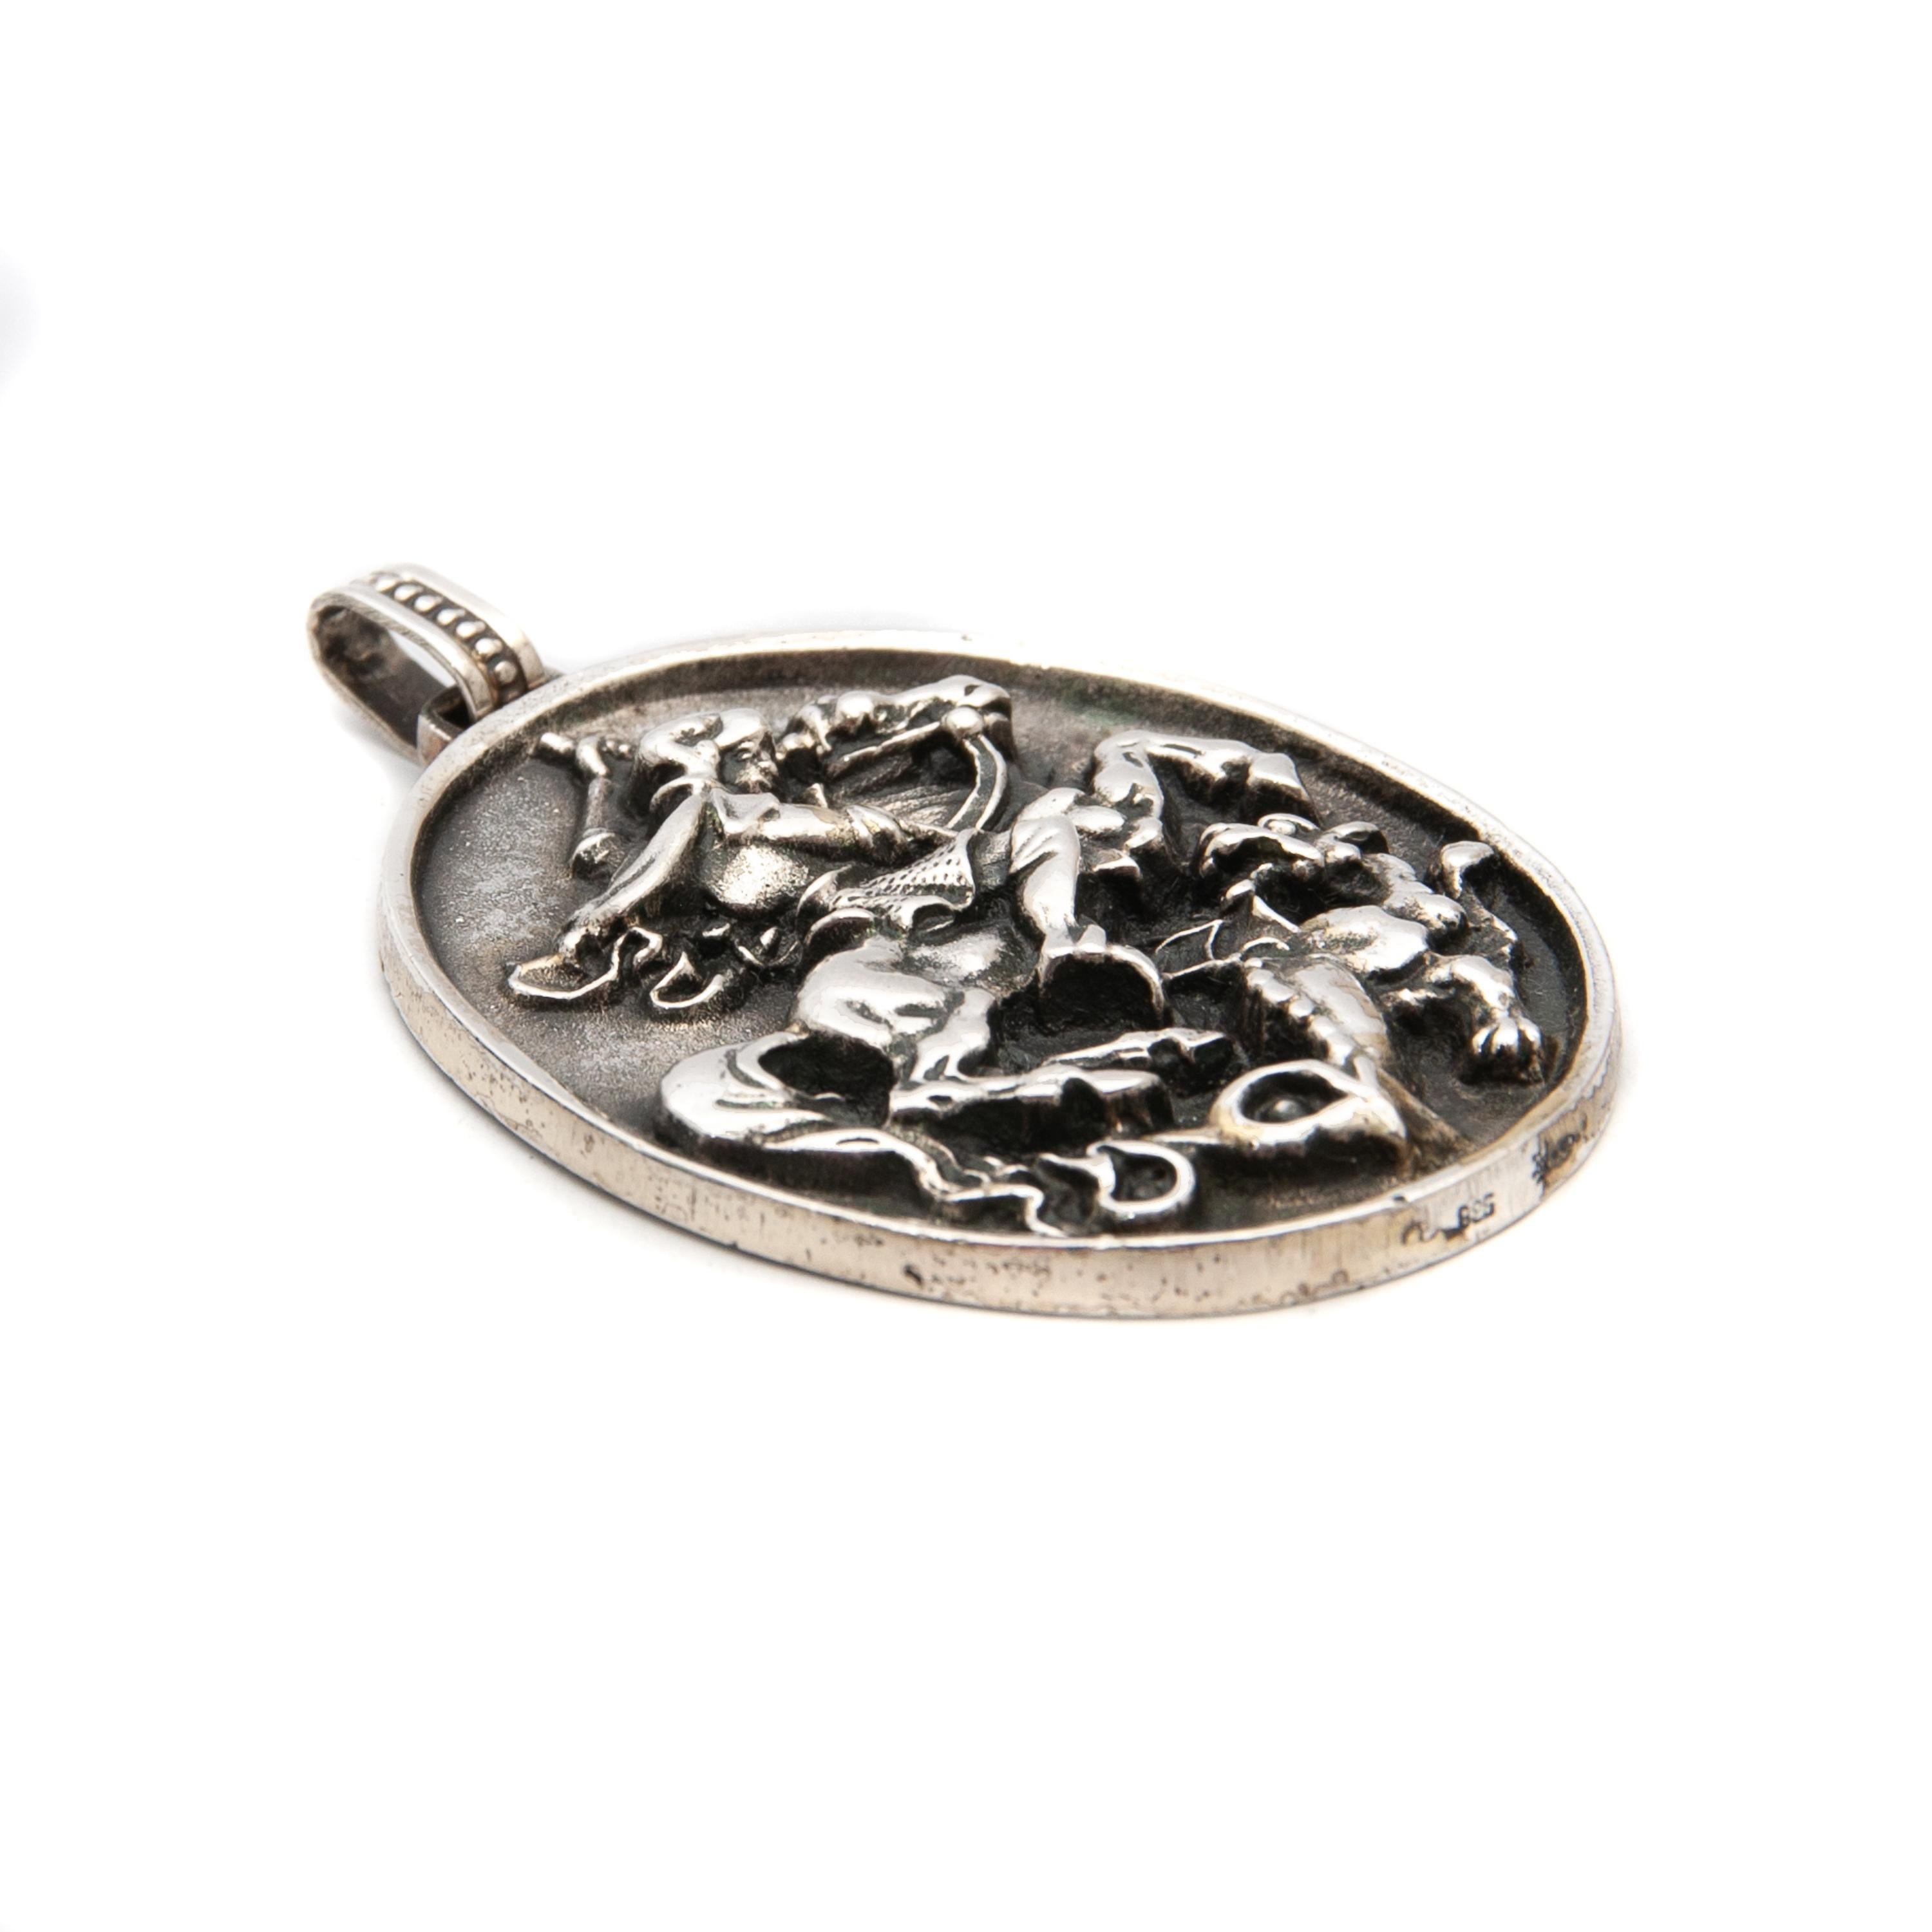 Detailed and heavy silver high relief pendant with a representation of warrior St. George and the Dragon. The large pendant of the victorious dragon slayer was made by Franz Eligius Blachian from first grade silver 925 in Traunstein around 1930. The